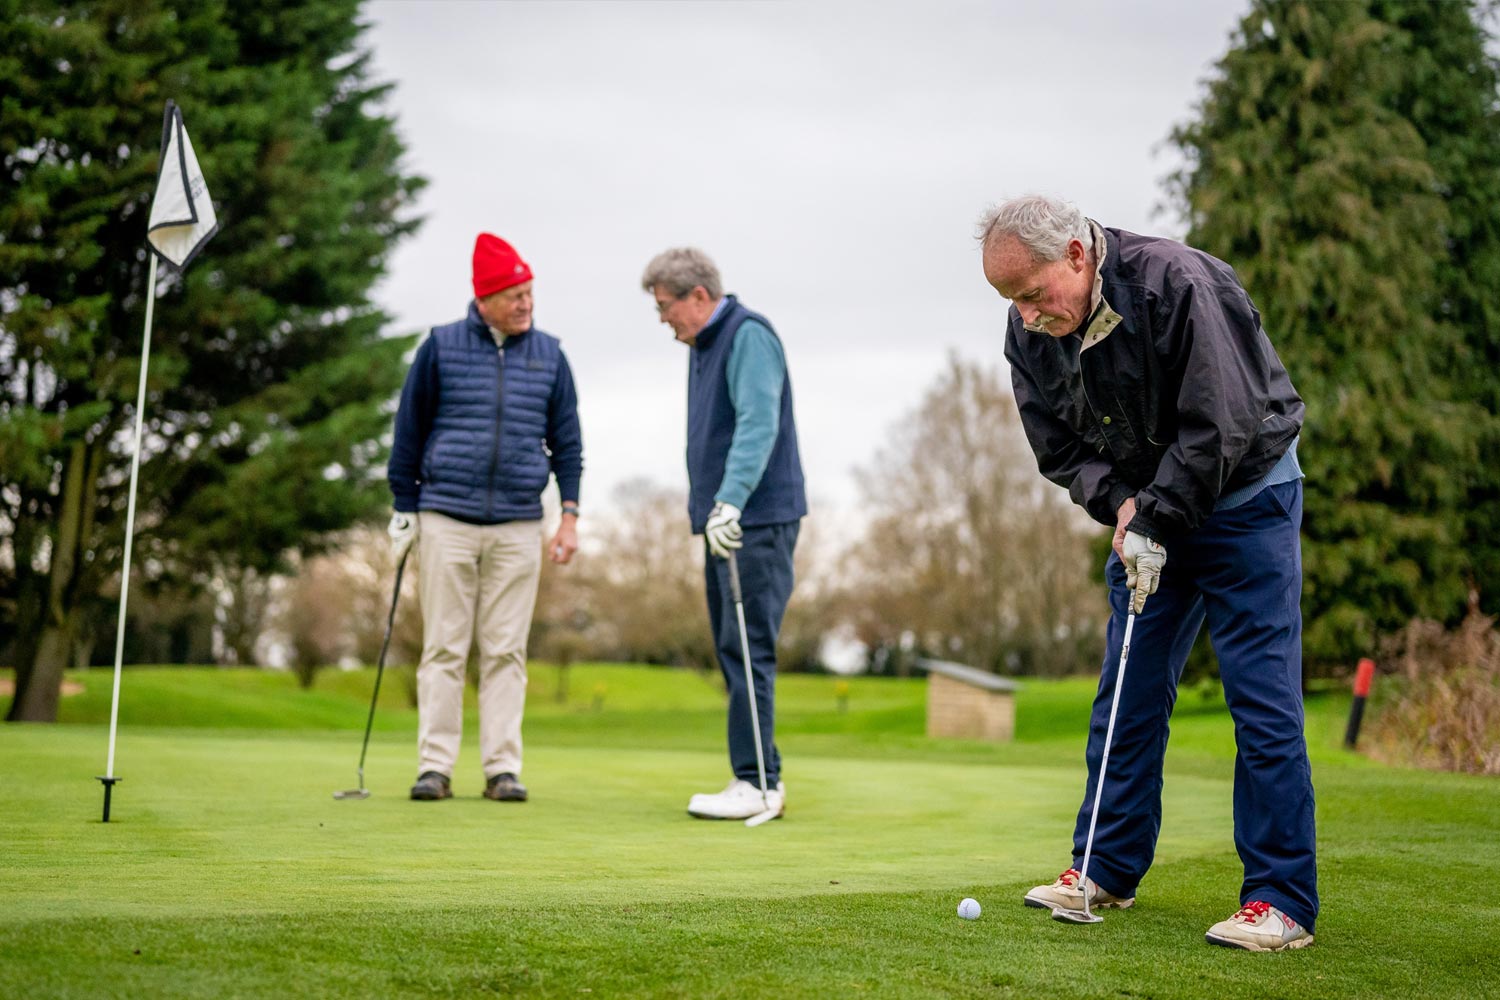 Play golf, no matter your age!